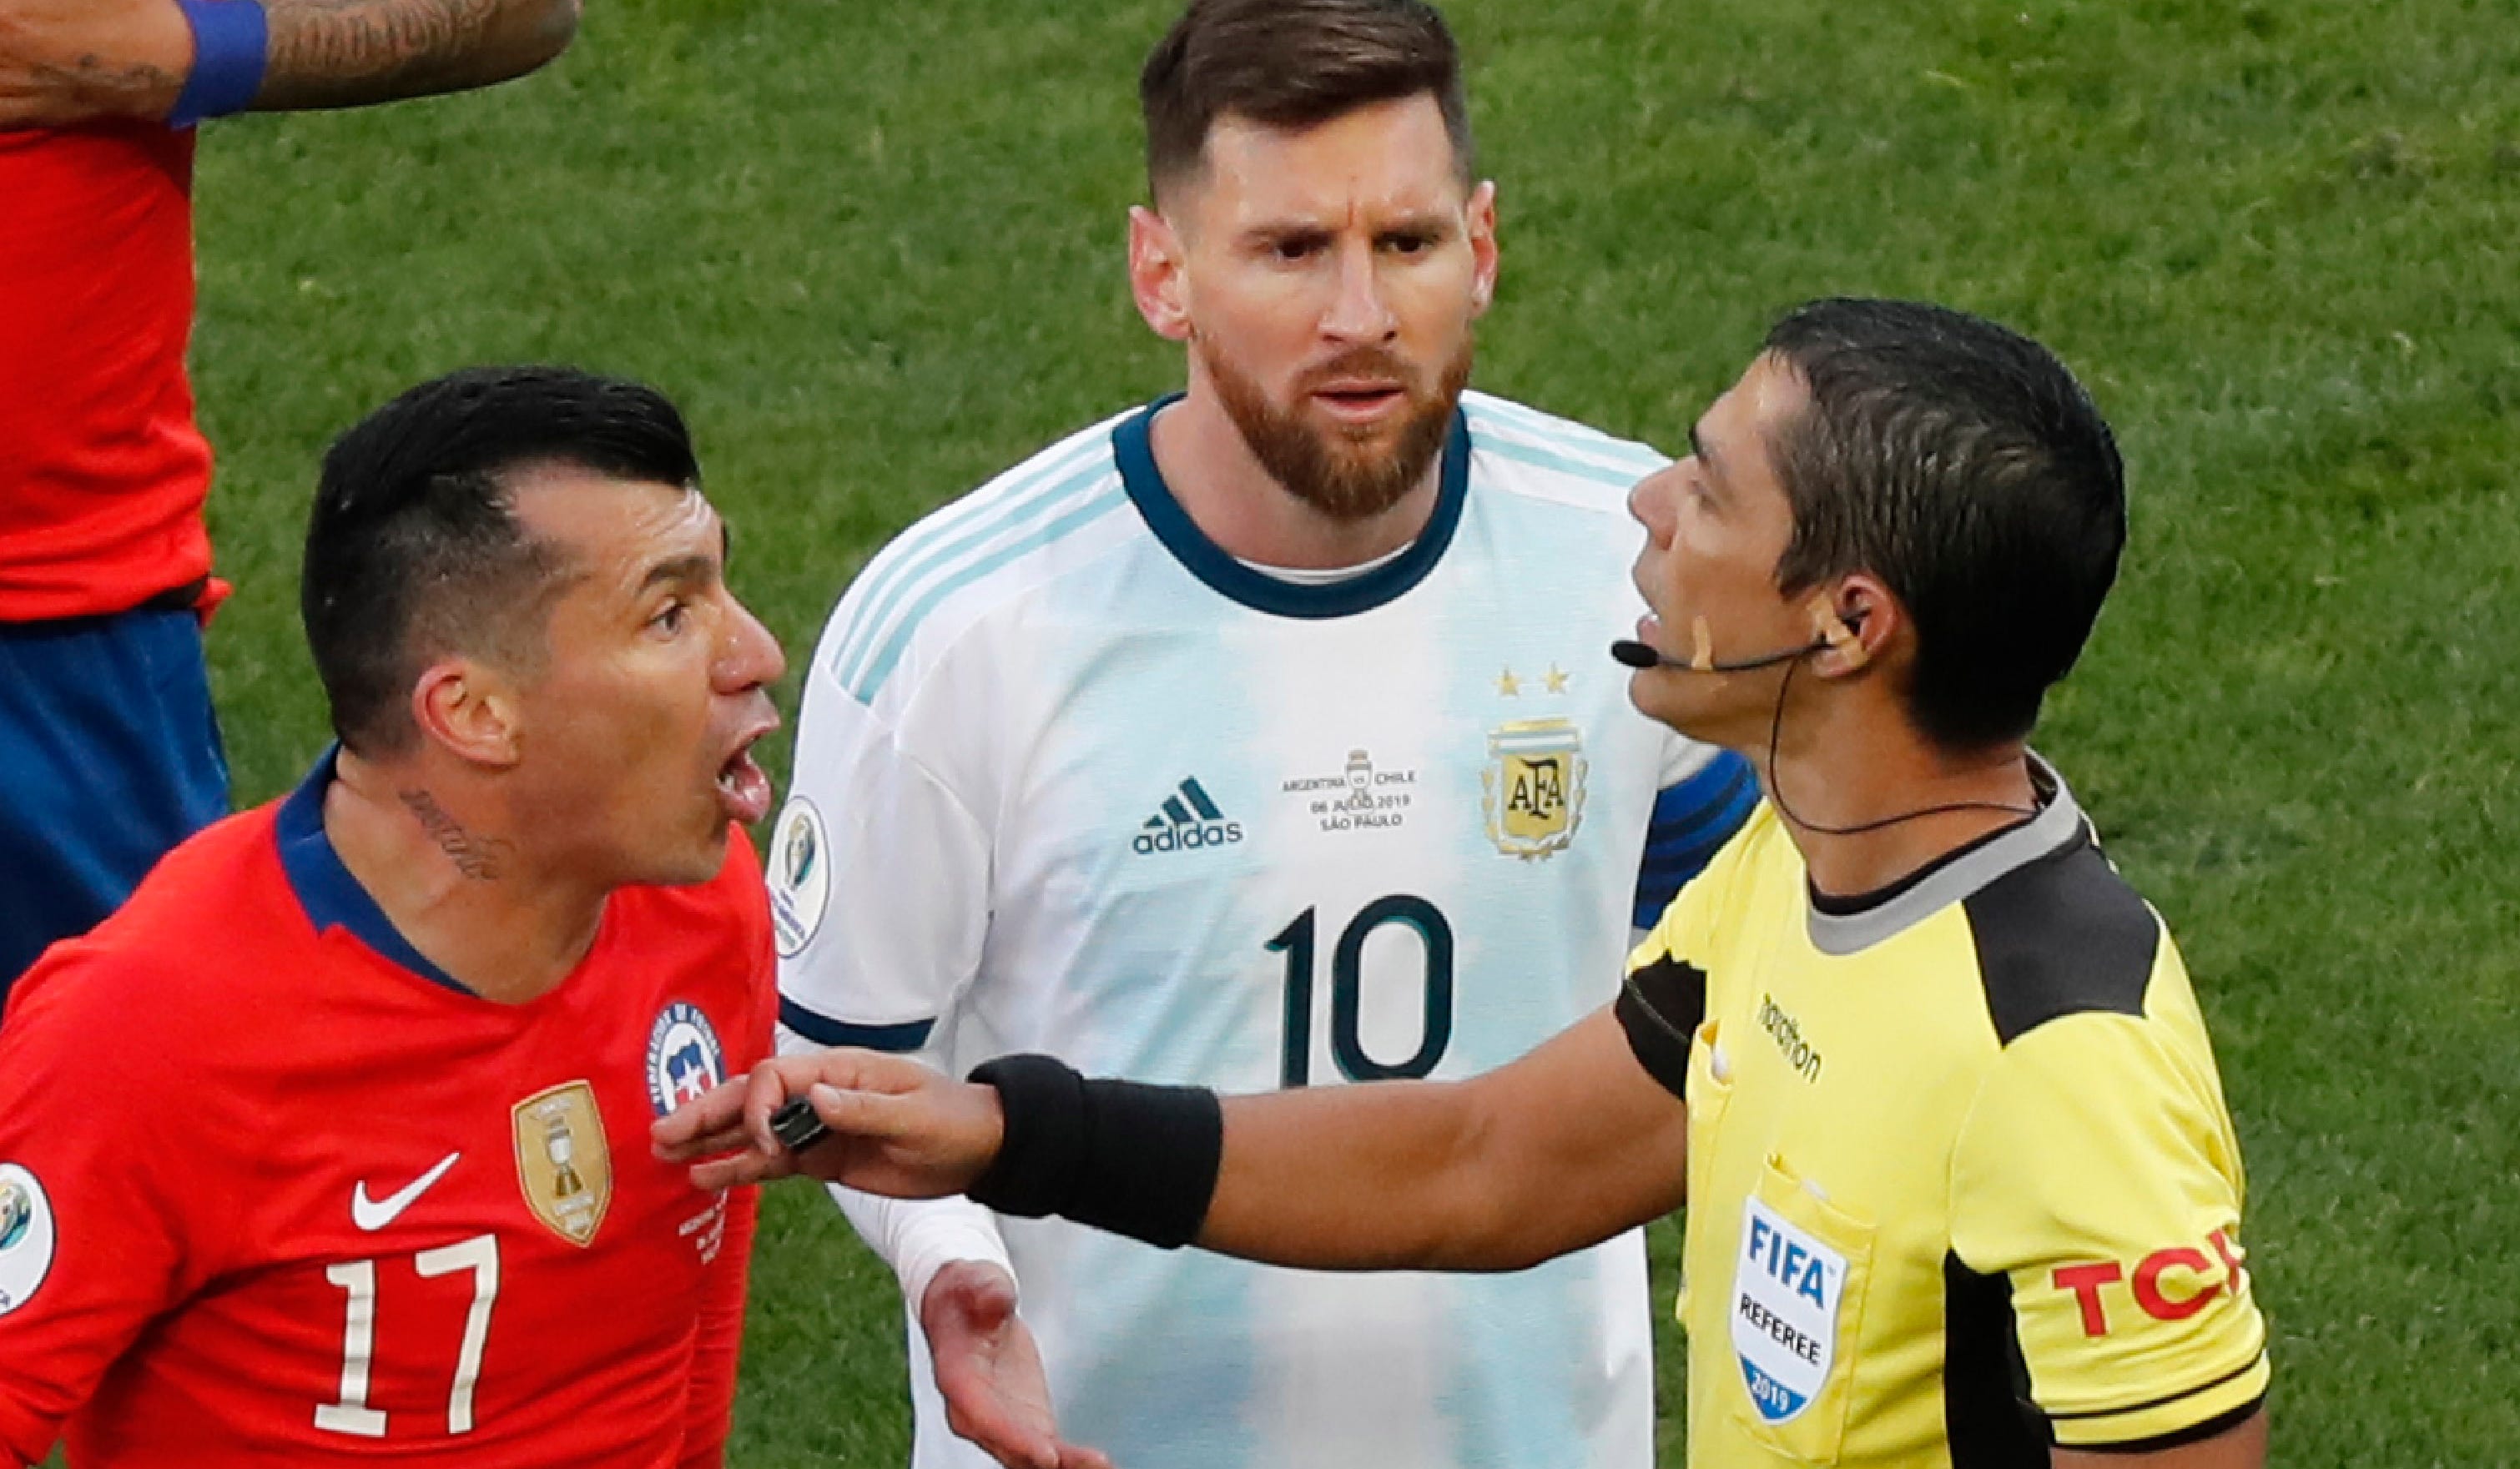 claims 'corruption' after red card at Copa